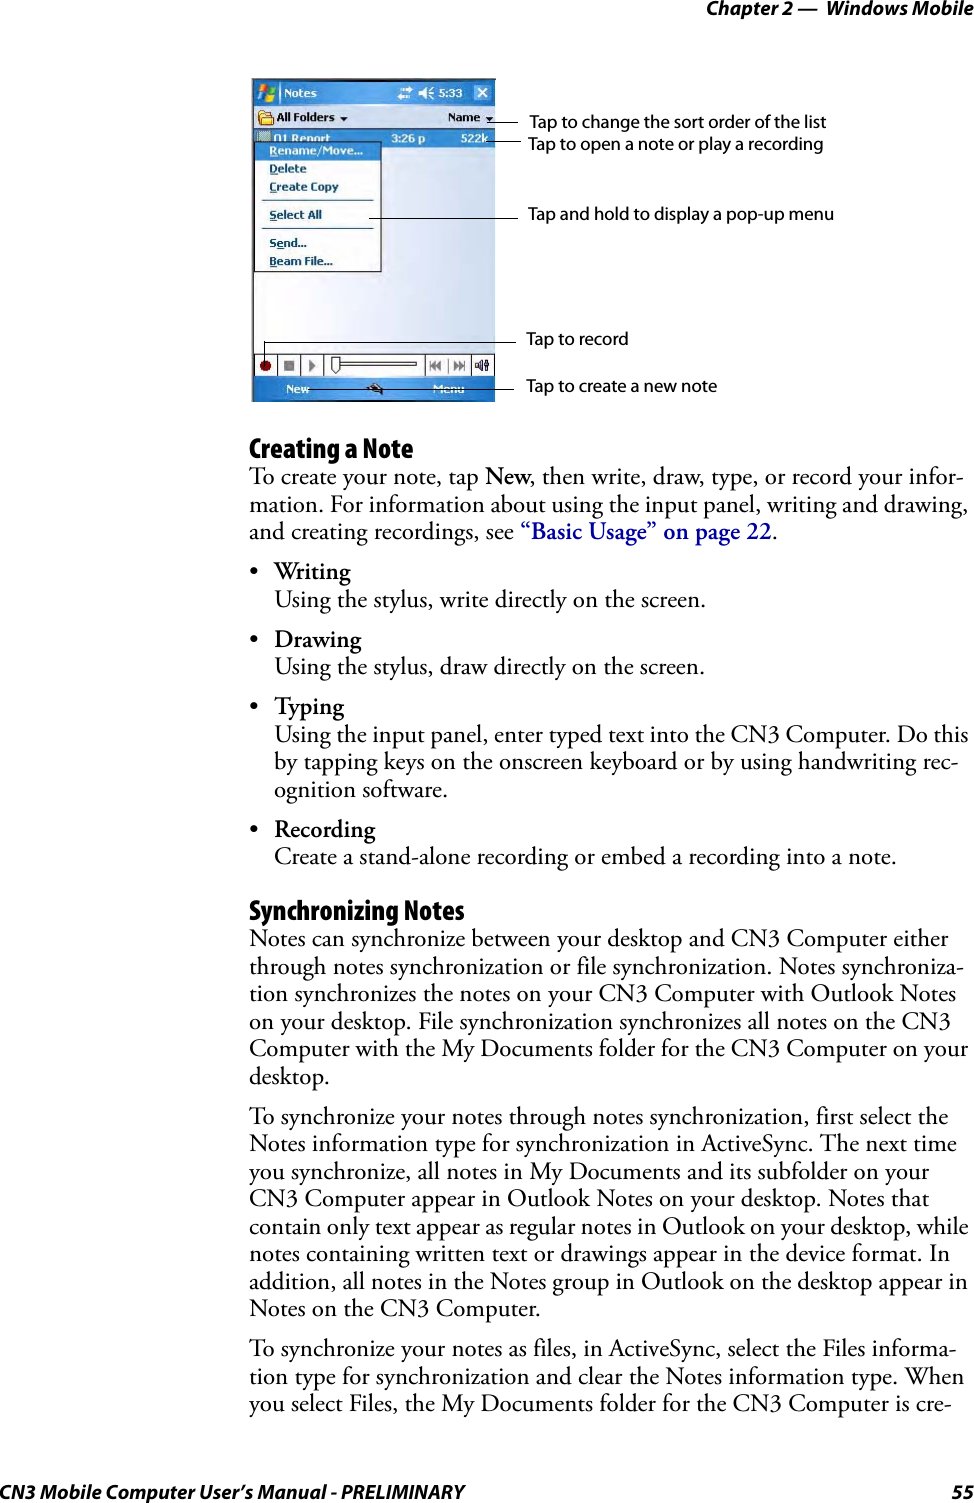 Chapter 2 —  Windows MobileCN3 Mobile Computer User’s Manual - PRELIMINARY 55Creating a NoteTo create your note, tap New, then write, draw, type, or record your infor-mation. For information about using the input panel, writing and drawing, and creating recordings, see “Basic Usage” on page 22.•Wri tingUsing the stylus, write directly on the screen.•DrawingUsing the stylus, draw directly on the screen.•TypingUsing the input panel, enter typed text into the CN3 Computer. Do this by tapping keys on the onscreen keyboard or by using handwriting rec-ognition software.•RecordingCreate a stand-alone recording or embed a recording into a note.Synchronizing NotesNotes can synchronize between your desktop and CN3 Computer either through notes synchronization or file synchronization. Notes synchroniza-tion synchronizes the notes on your CN3 Computer with Outlook Notes on your desktop. File synchronization synchronizes all notes on the CN3 Computer with the My Documents folder for the CN3 Computer on your desktop.To synchronize your notes through notes synchronization, first select the Notes information type for synchronization in ActiveSync. The next time you synchronize, all notes in My Documents and its subfolder on your CN3 Computer appear in Outlook Notes on your desktop. Notes that contain only text appear as regular notes in Outlook on your desktop, while notes containing written text or drawings appear in the device format. In addition, all notes in the Notes group in Outlook on the desktop appear in Notes on the CN3 Computer.To synchronize your notes as files, in ActiveSync, select the Files informa-tion type for synchronization and clear the Notes information type. When you select Files, the My Documents folder for the CN3 Computer is cre-Tap to change the sort order of the listTap to open a note or play a recordingTap and hold to display a pop-up menuTap to recordTap to create a new note